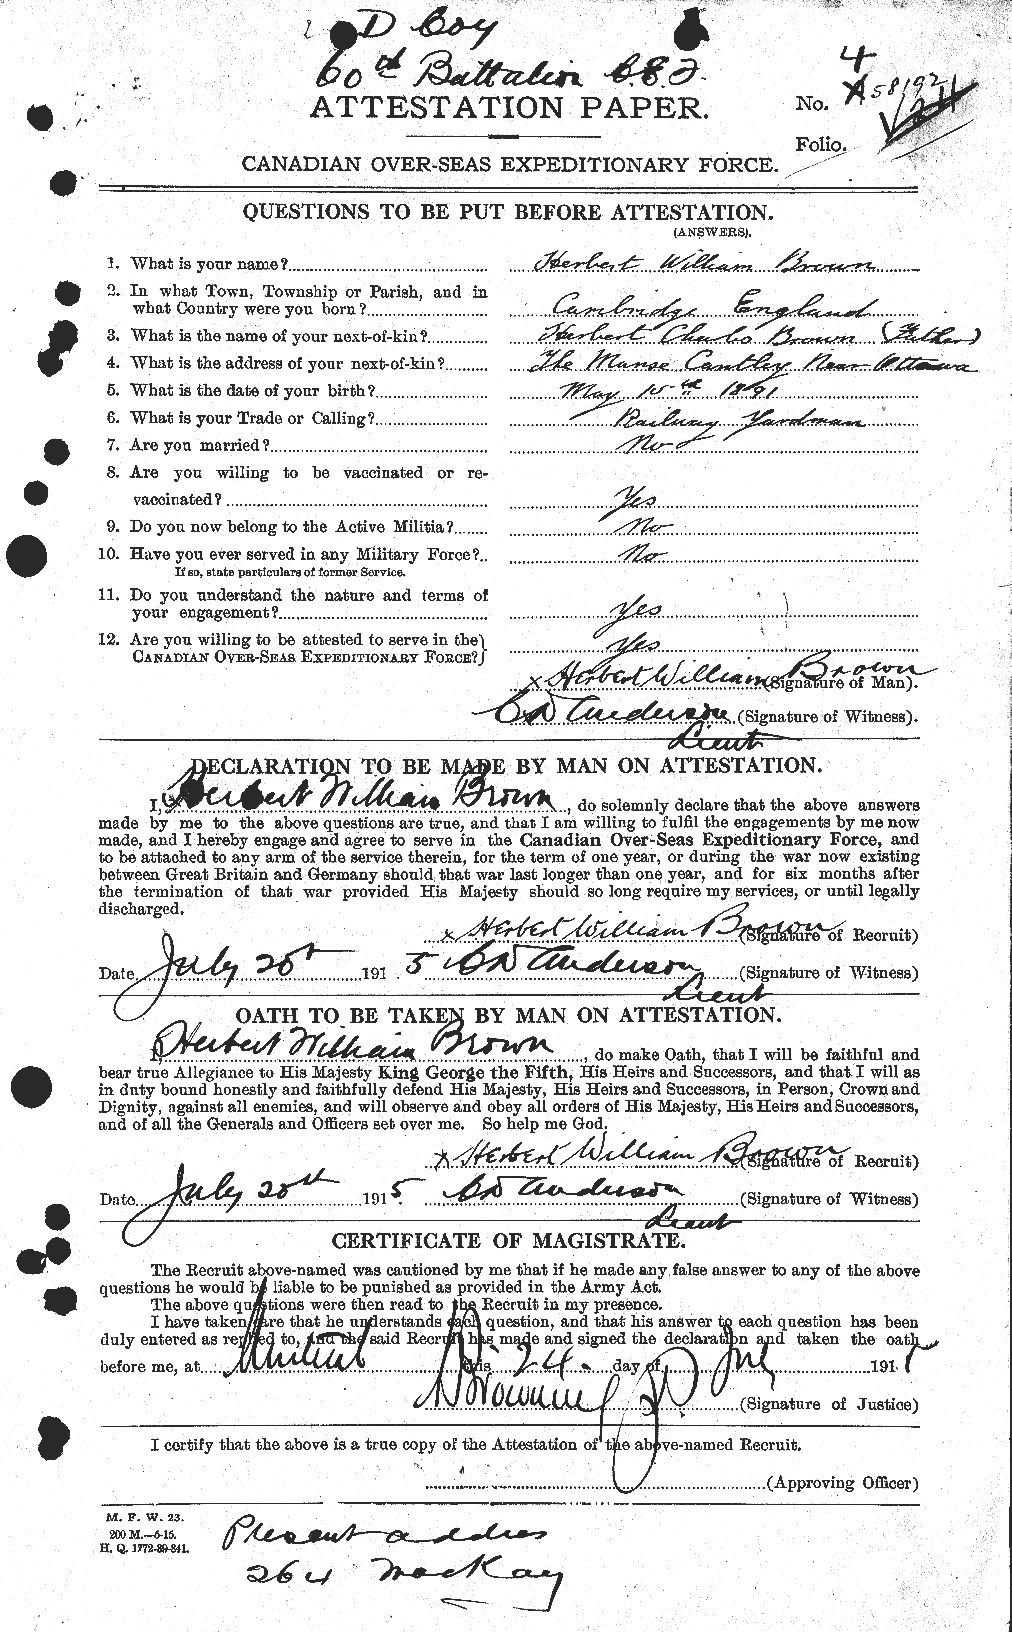 Personnel Records of the First World War - CEF 265594a